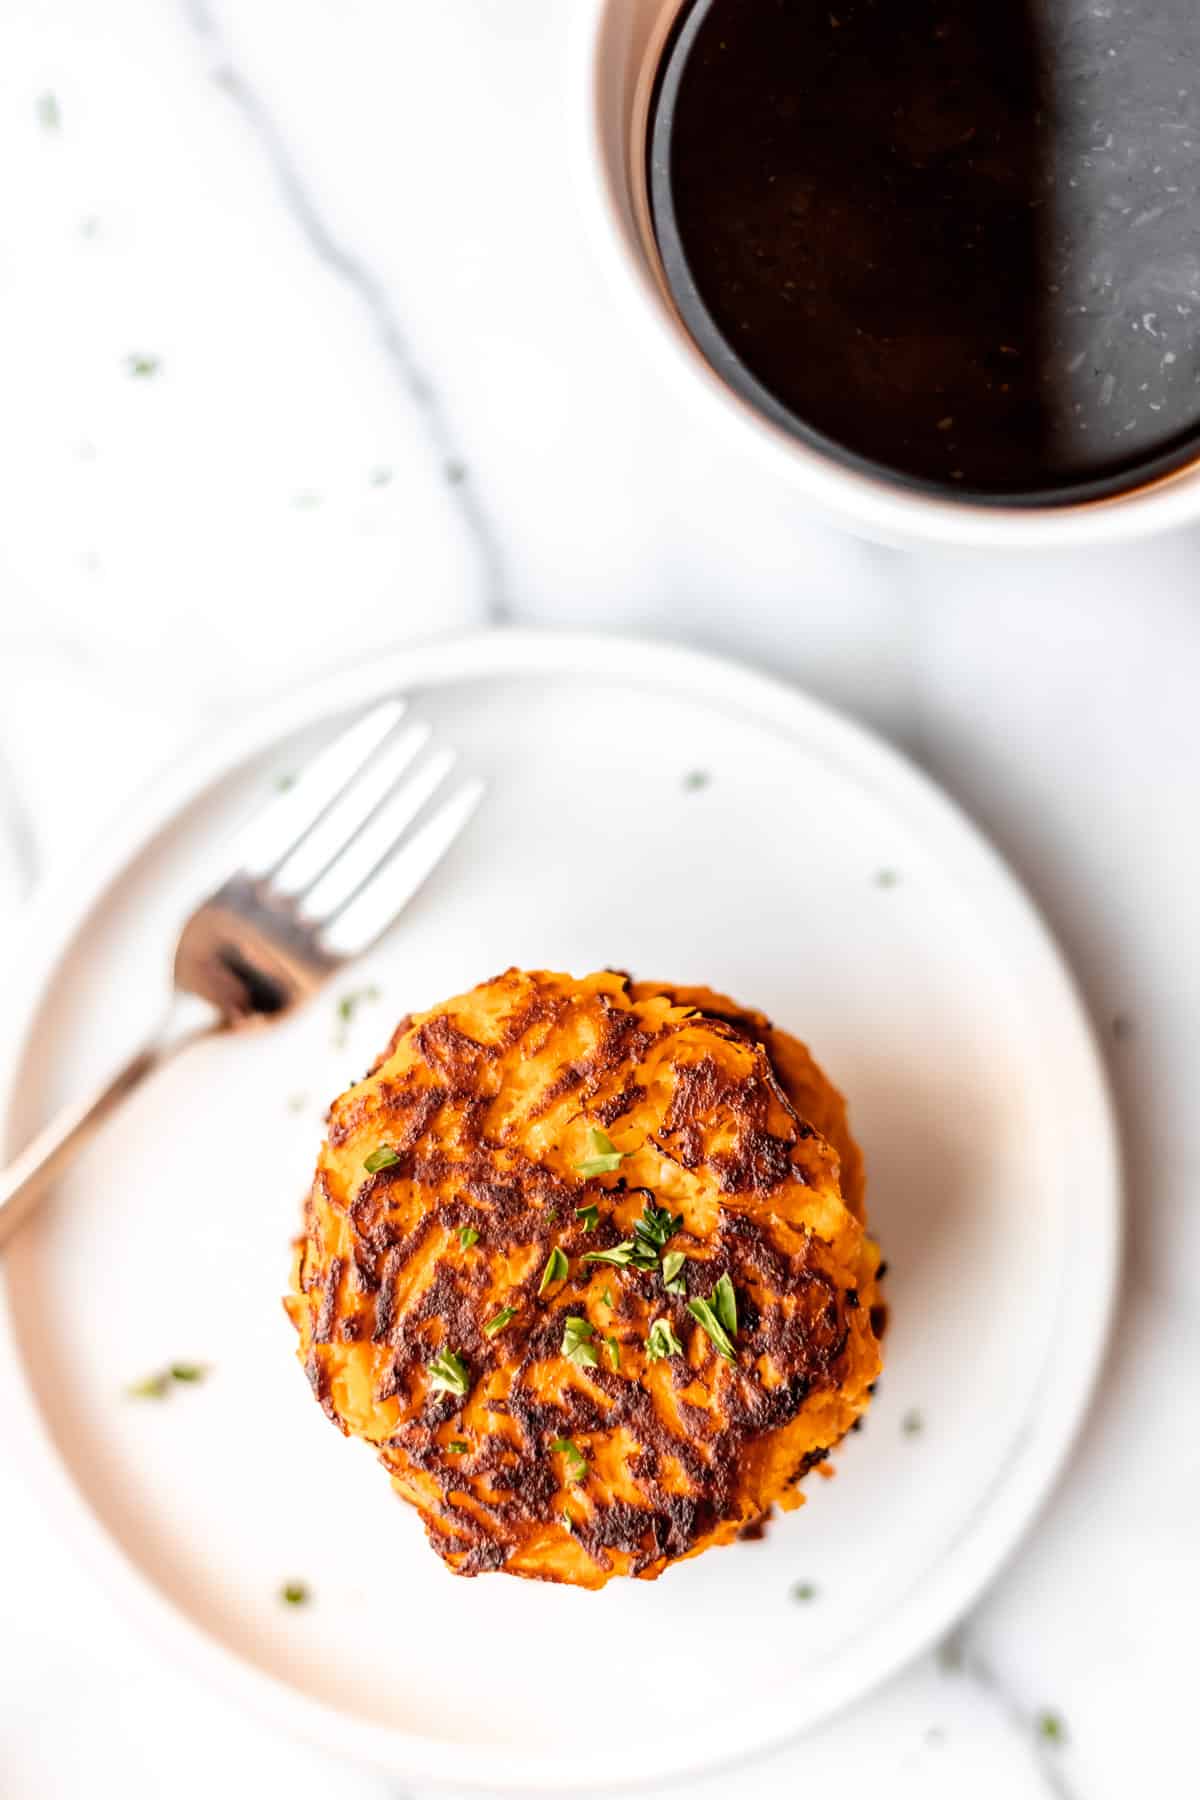 Overhead of sweet potato hash browns on a white plate with a fork and a cup of coffee off to the side.